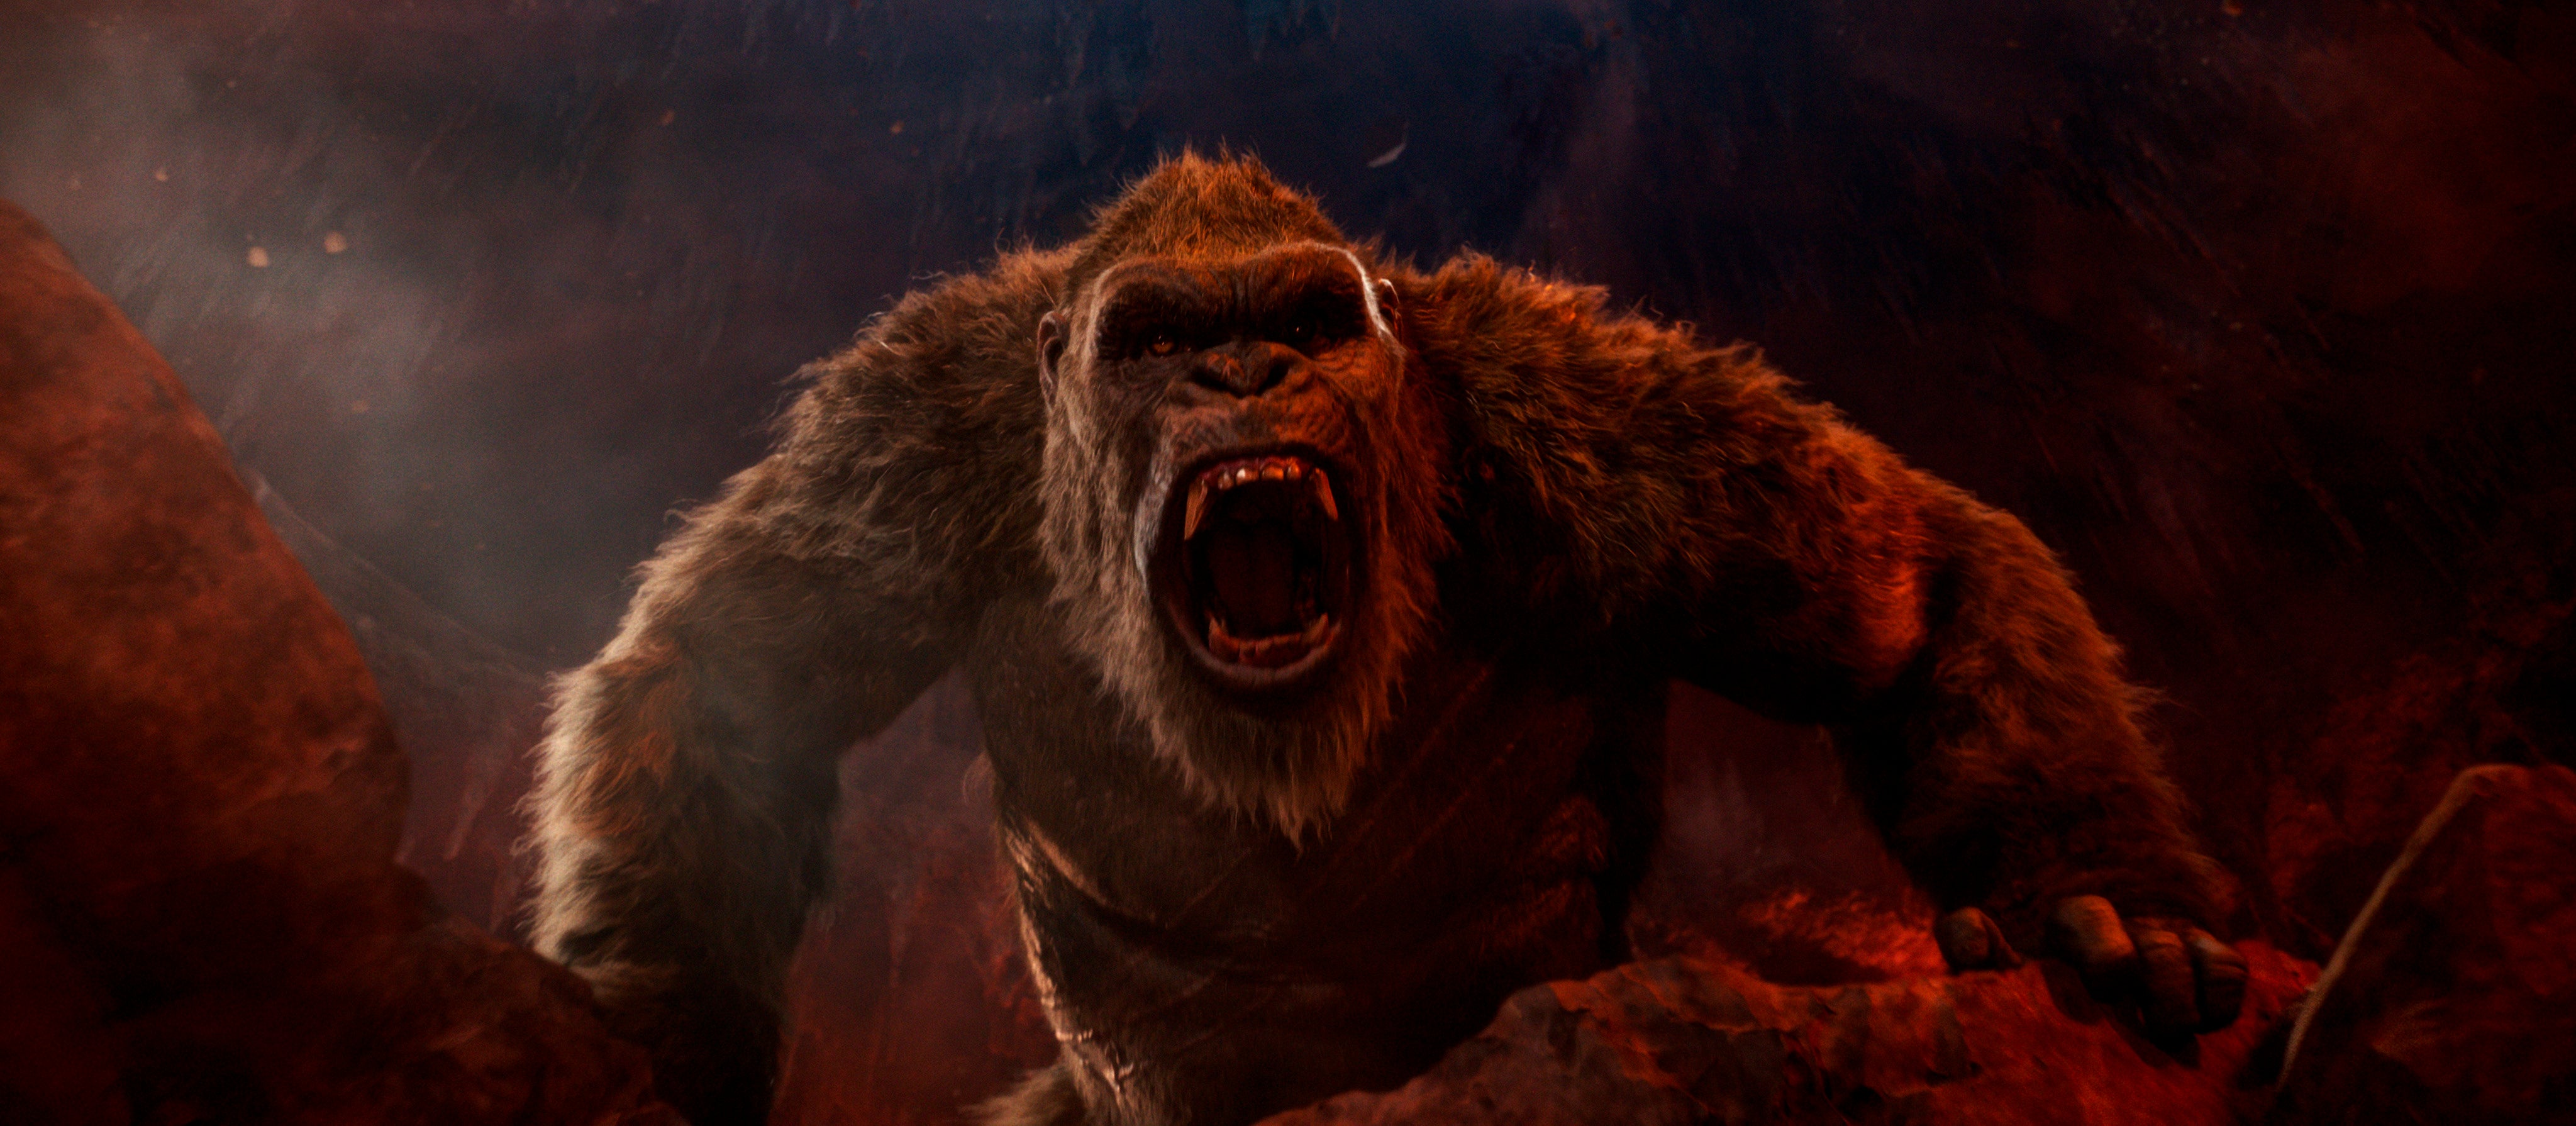 With King Kong, a little swagger returns to the box office Brazil